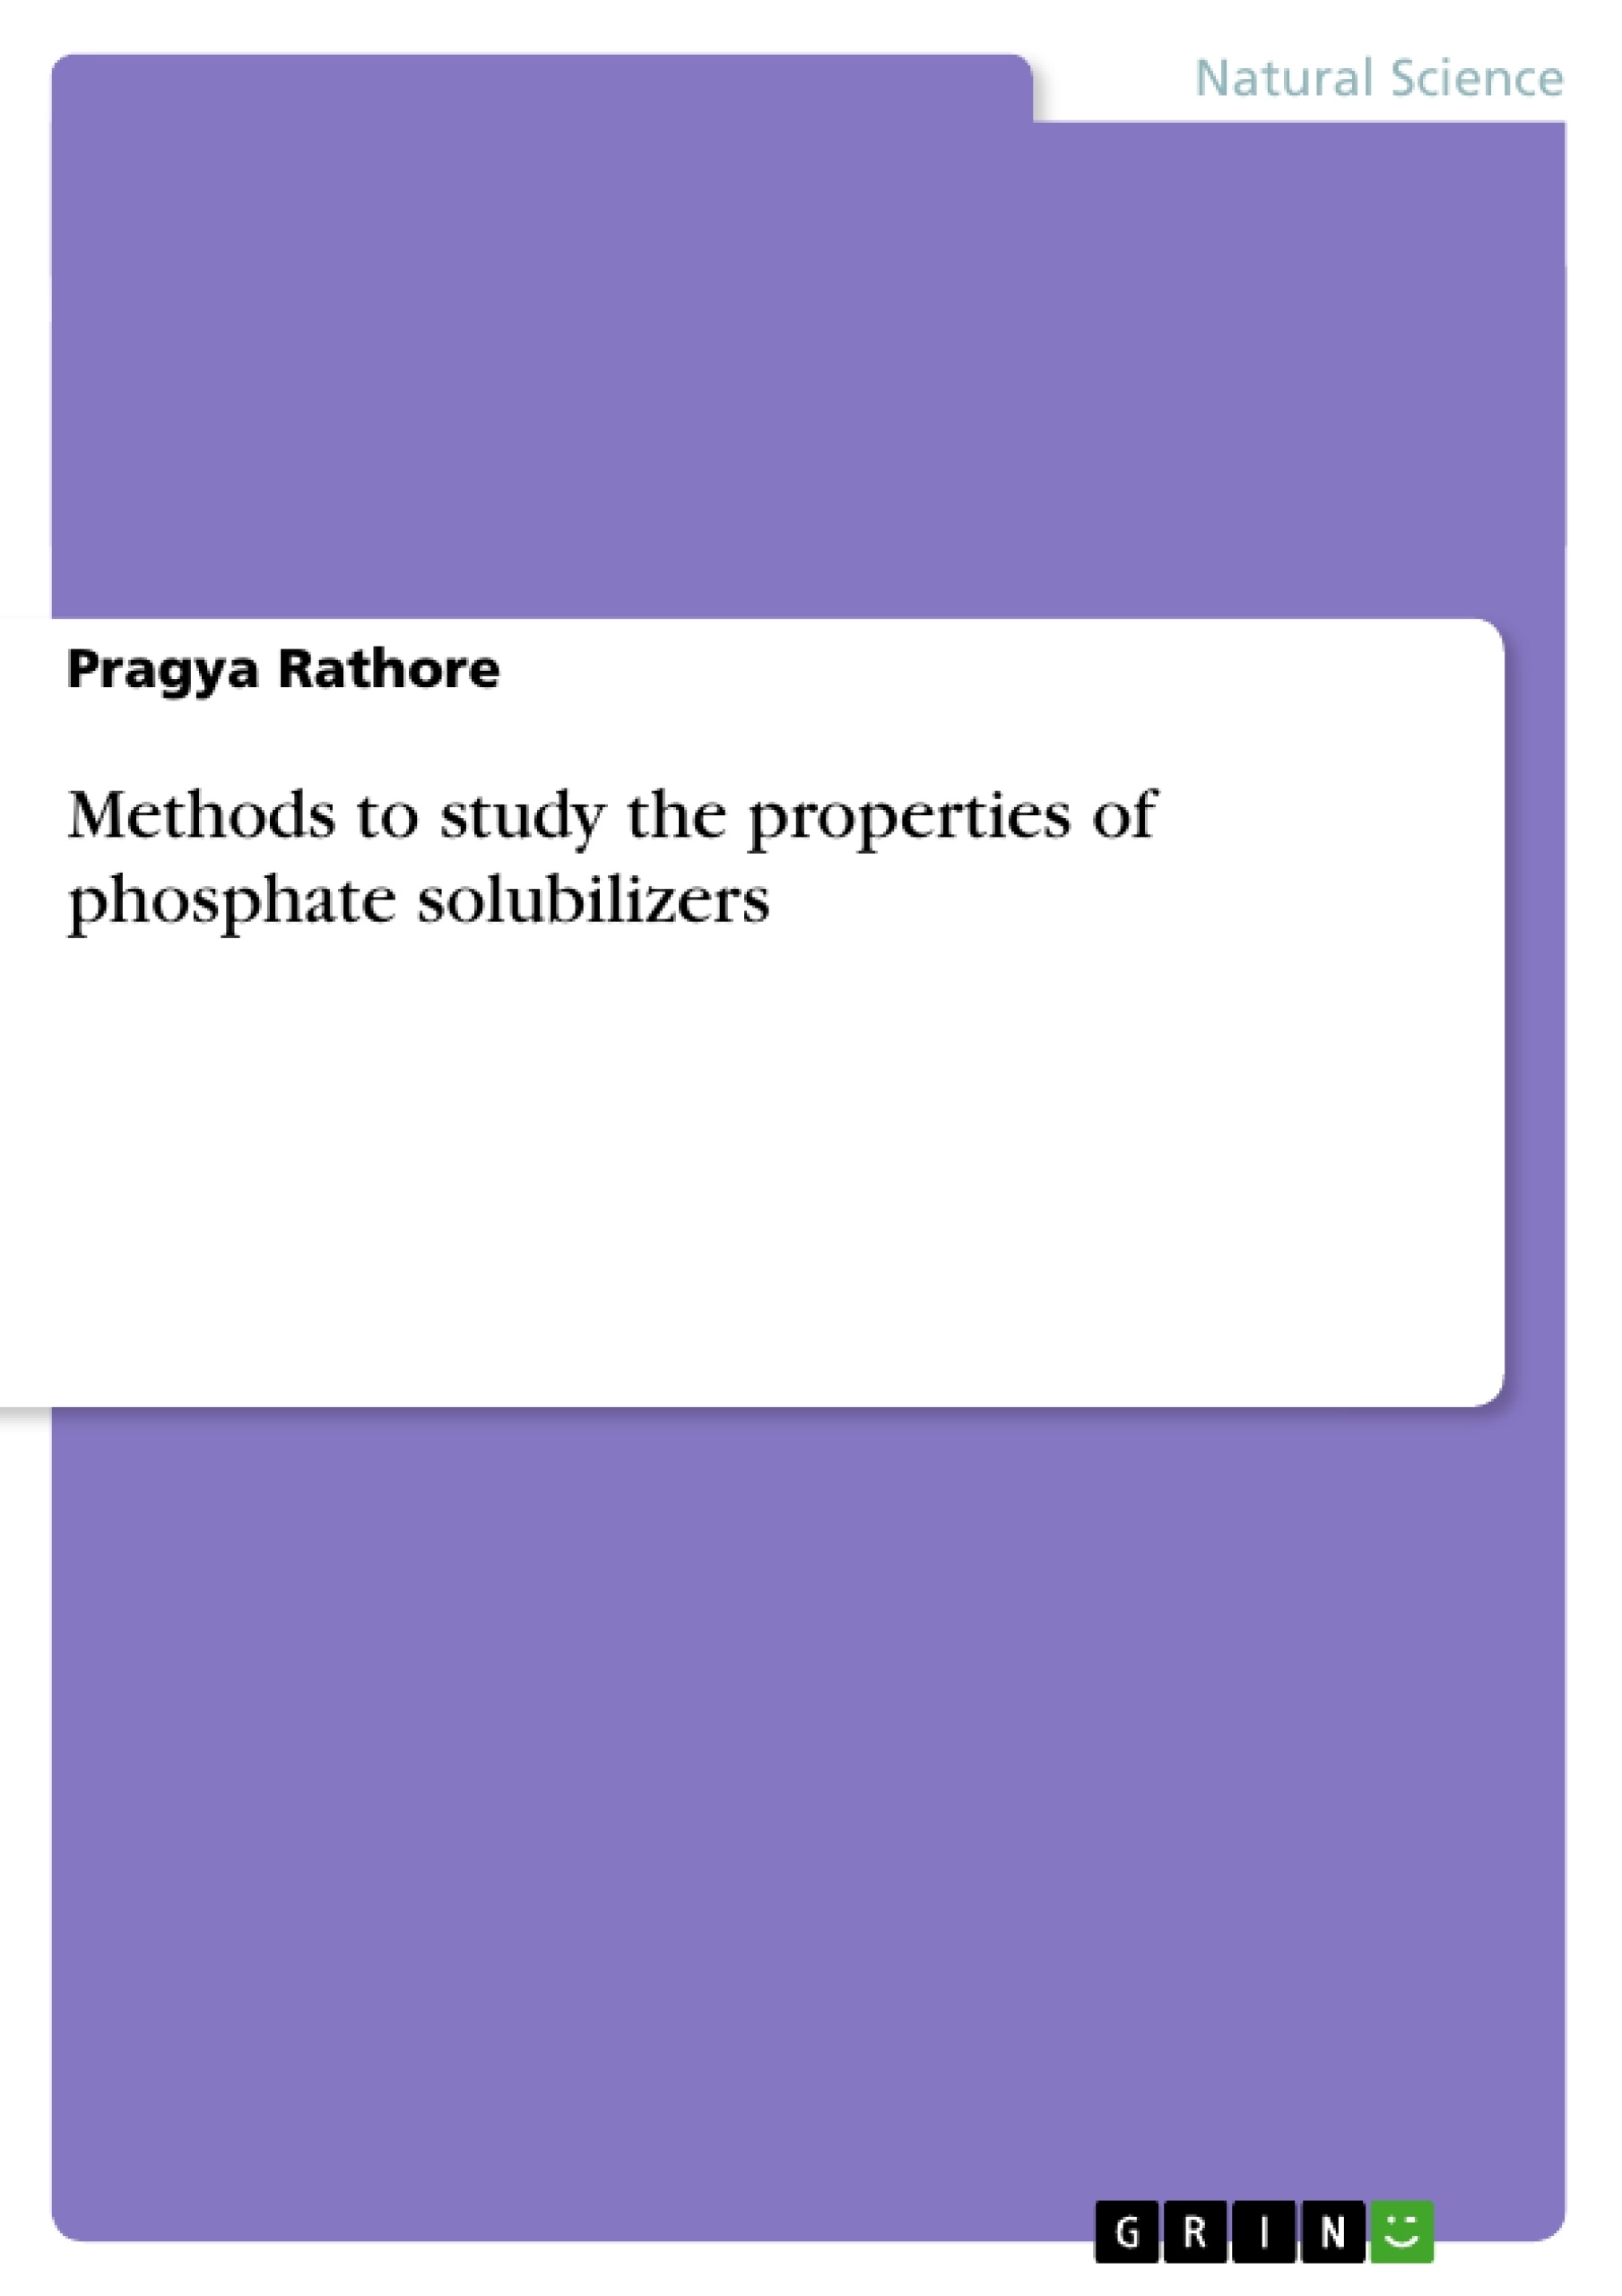 Titre: Methods to study the properties of phosphate solubilizers